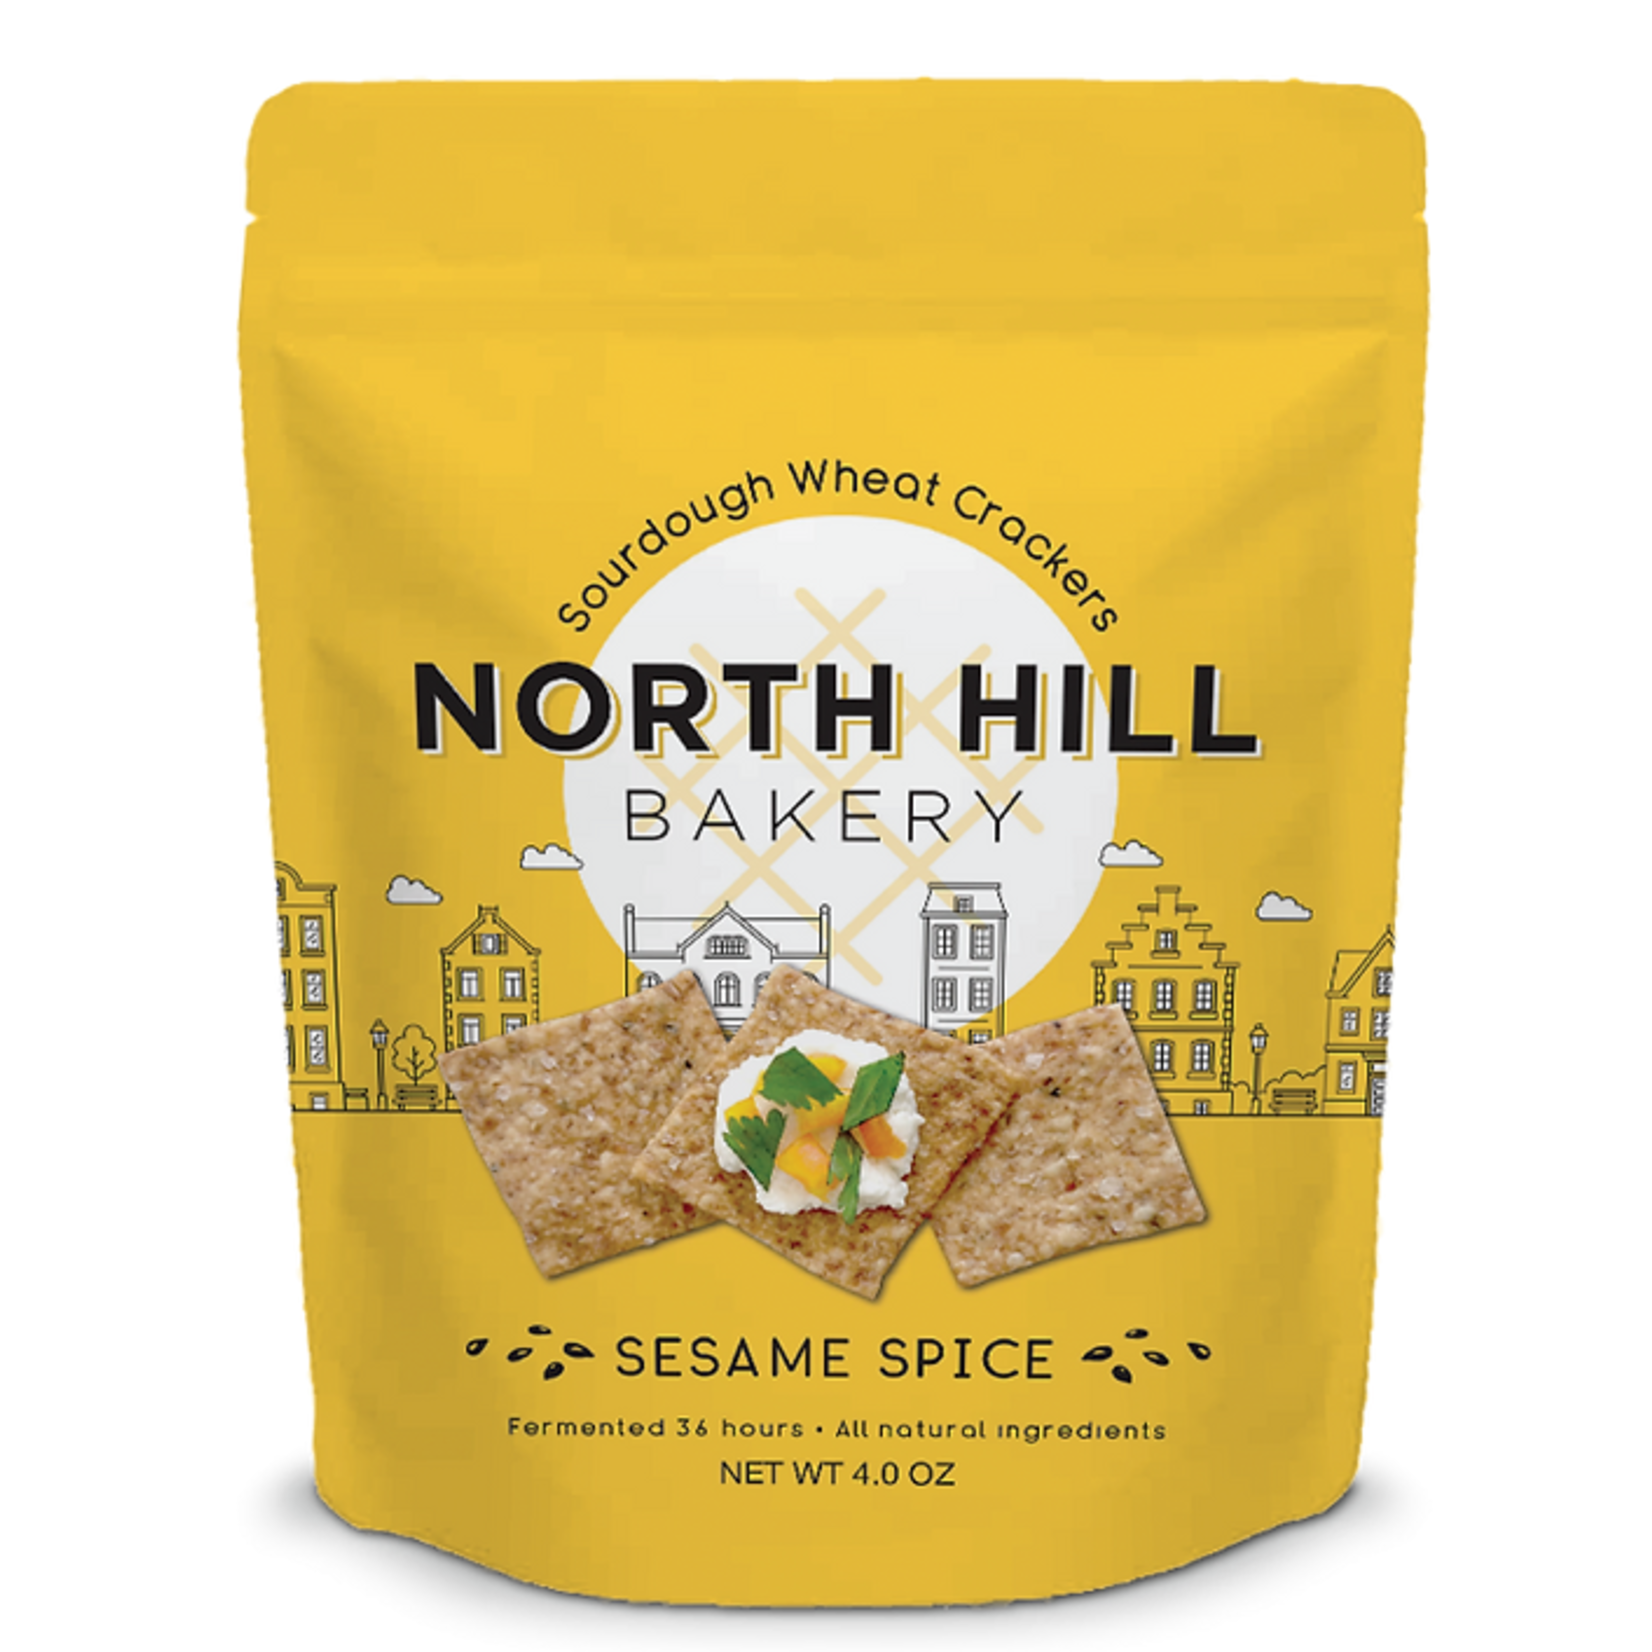 North Hill Bakery North Hill Bakery Sourdough Wheat Crackers Sesame Spice 4 ounce